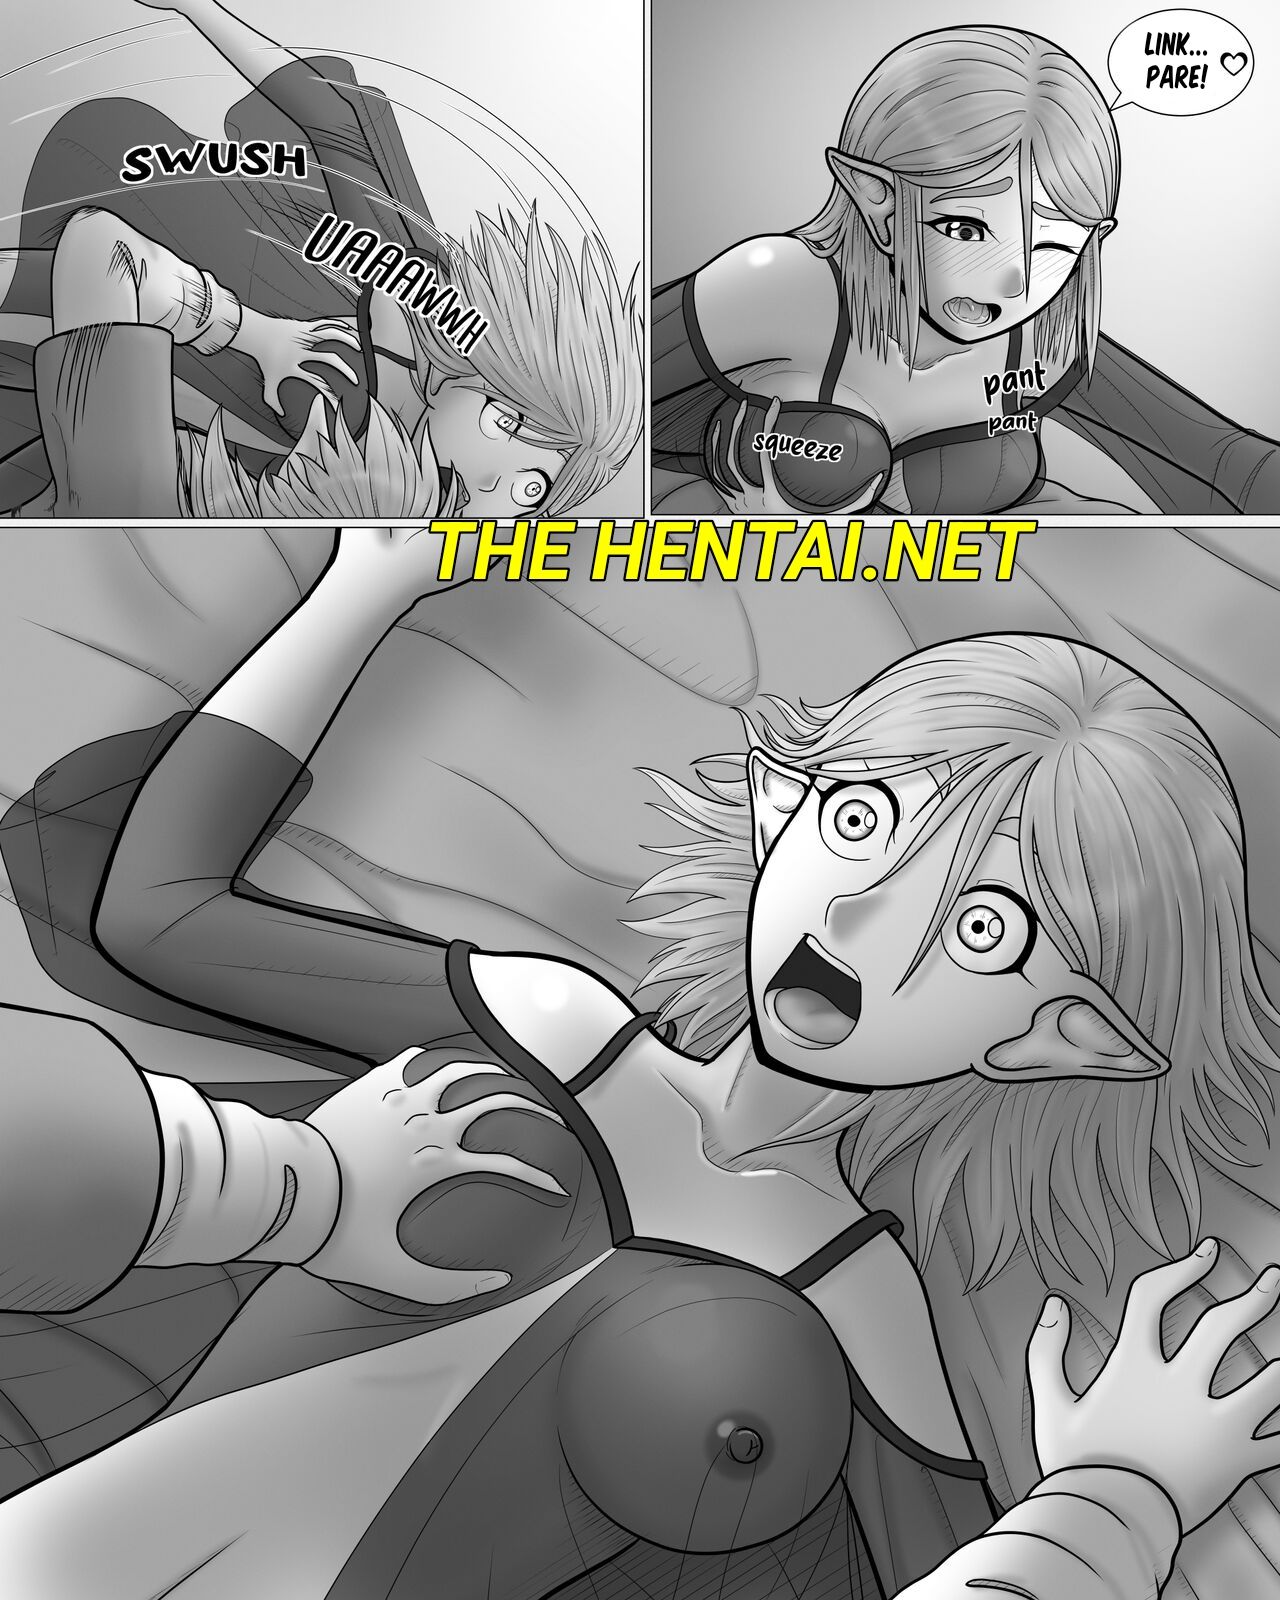 The Legend of Zelda: A Night with the Princess Hentai pt-br 25